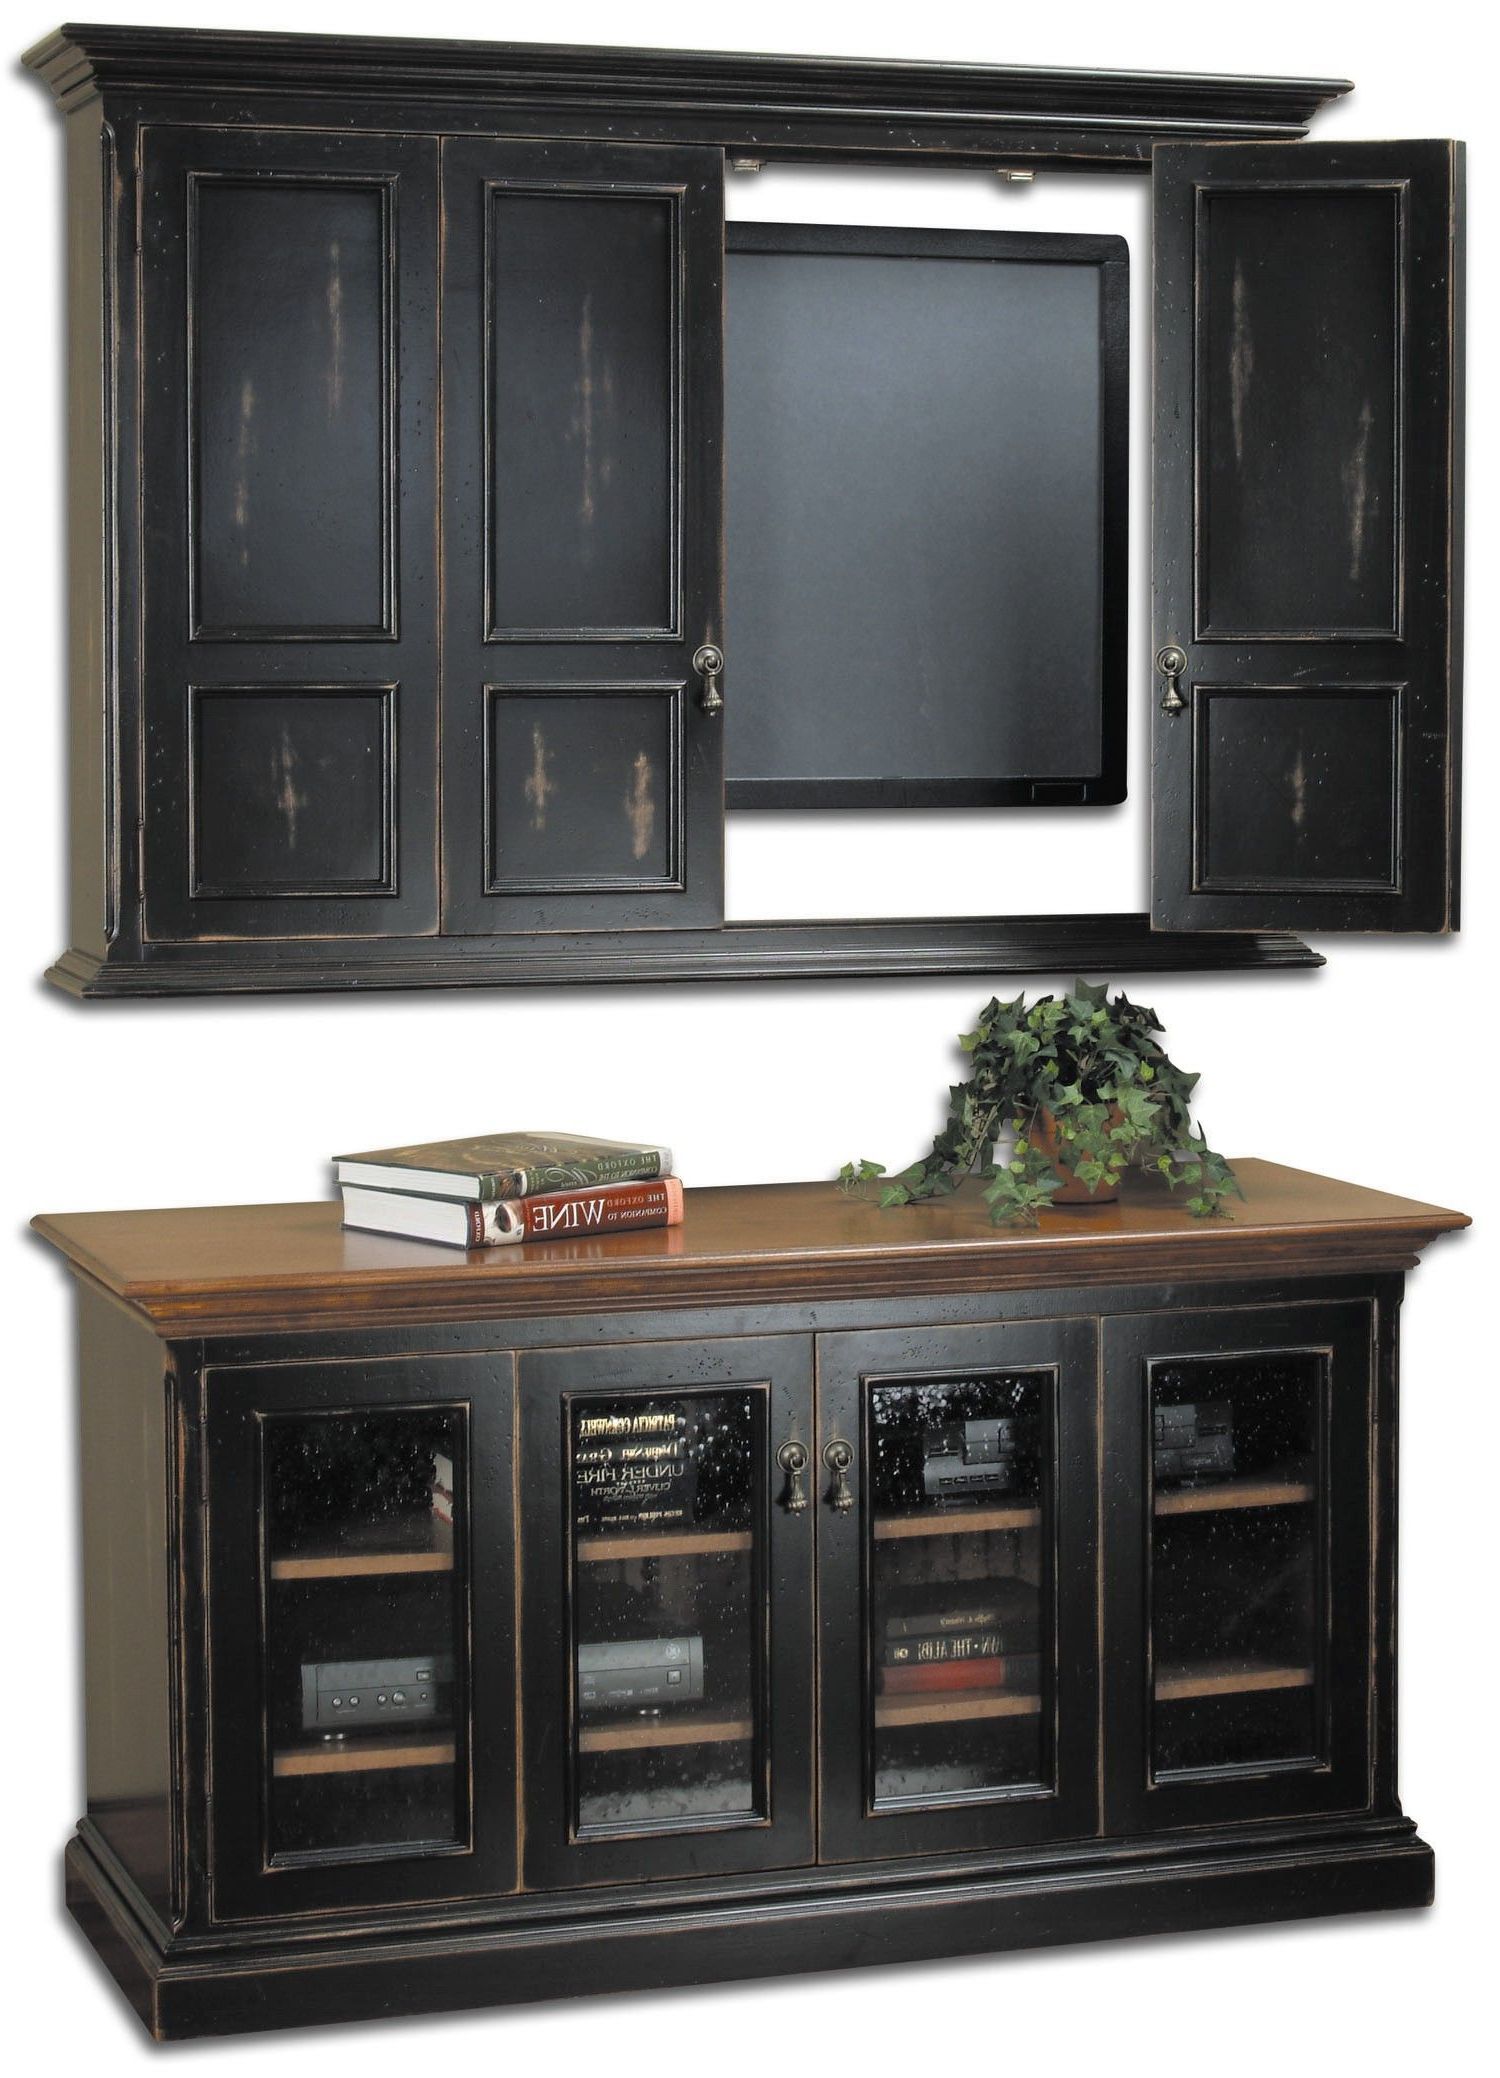 Most Recent Flat Screen Tv Stands Corner Units Within Country Classics Painted Furniture, Hillsboro Flat Screen Tv Wall (View 7 of 20)